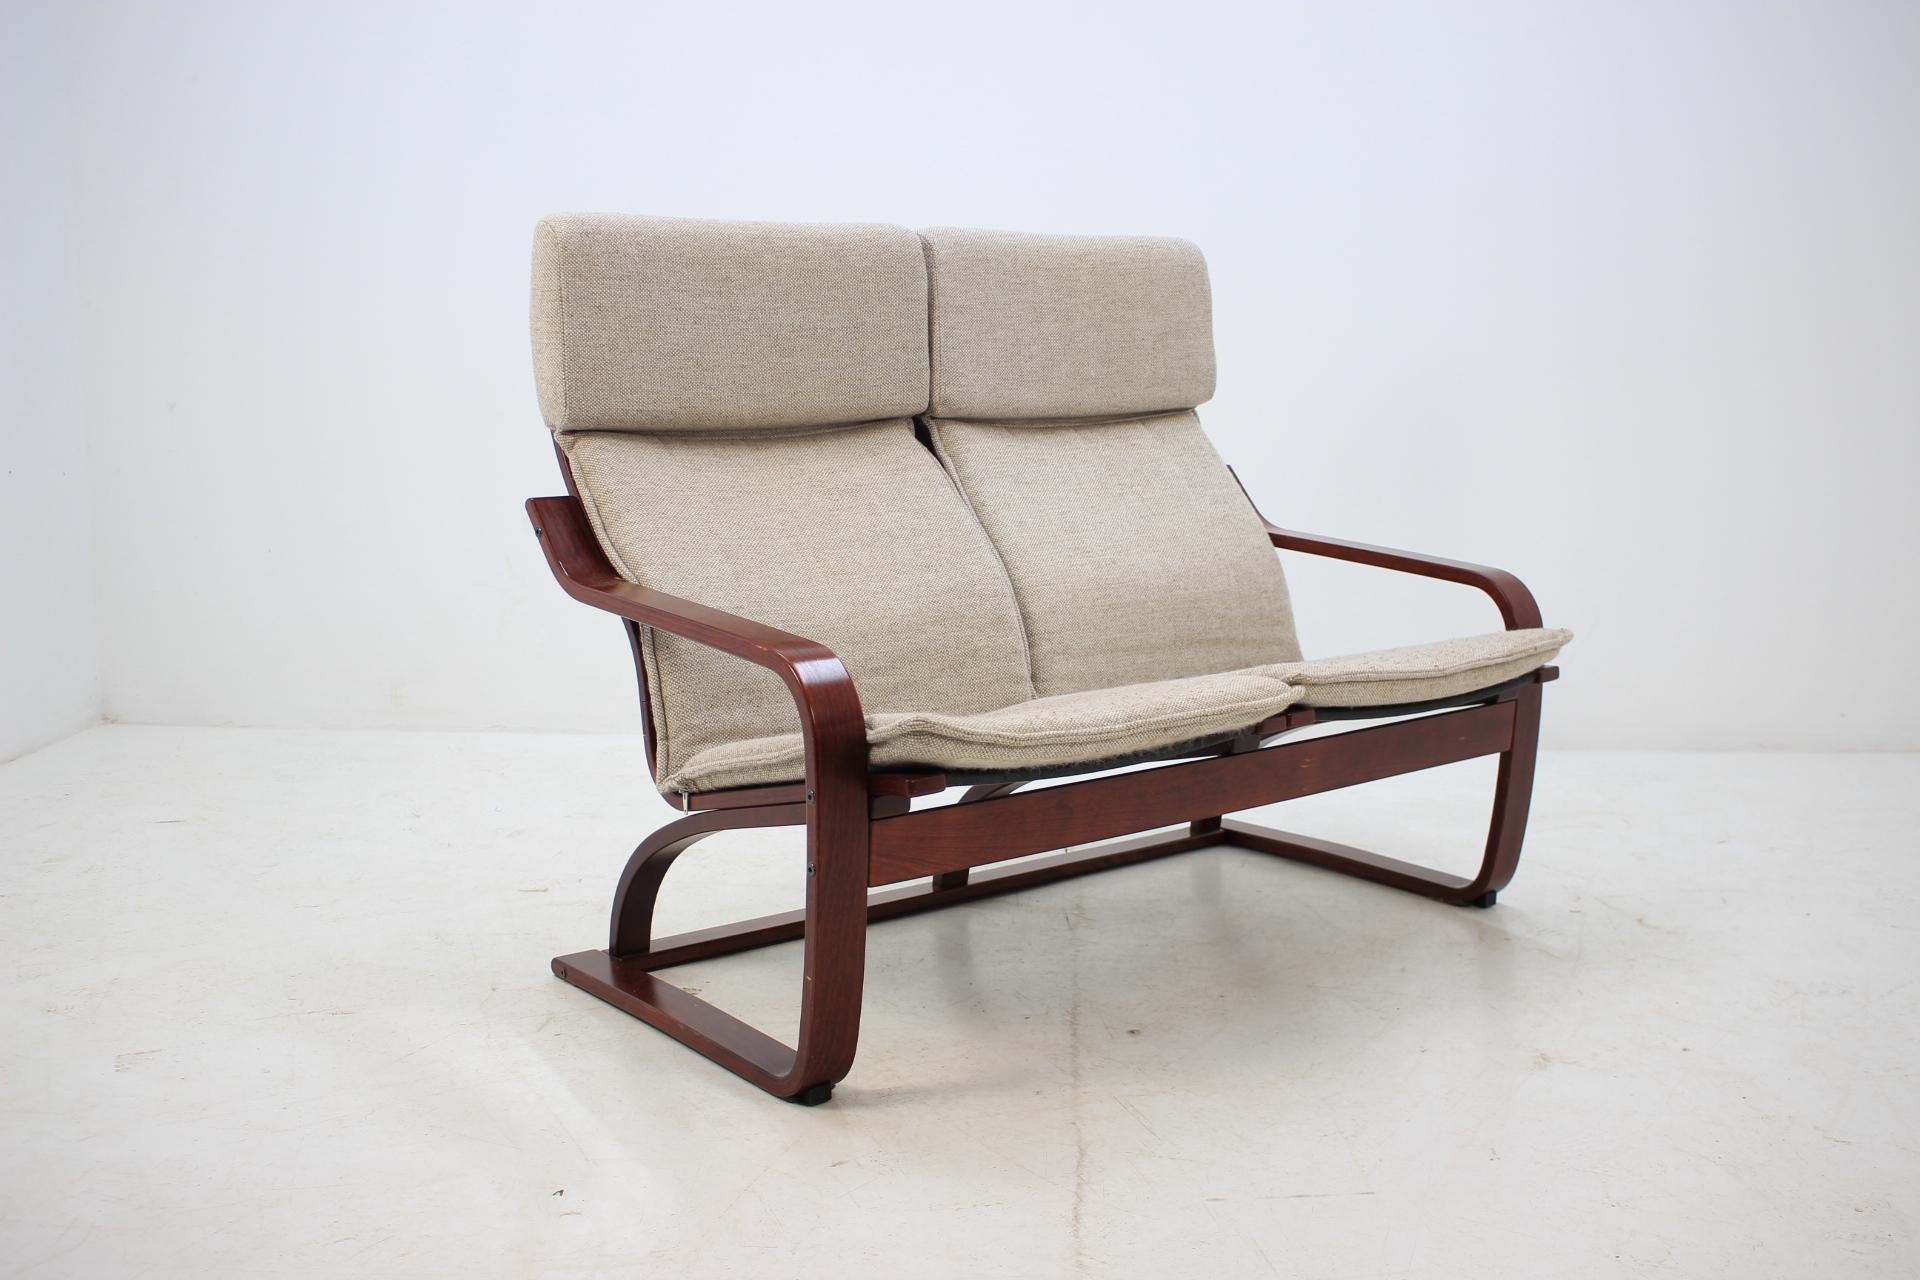 Produced by Ton, Czechoslovakia in late 1980s. The frame is made from beech bentwood. The original cushions and the item are in good original condition.